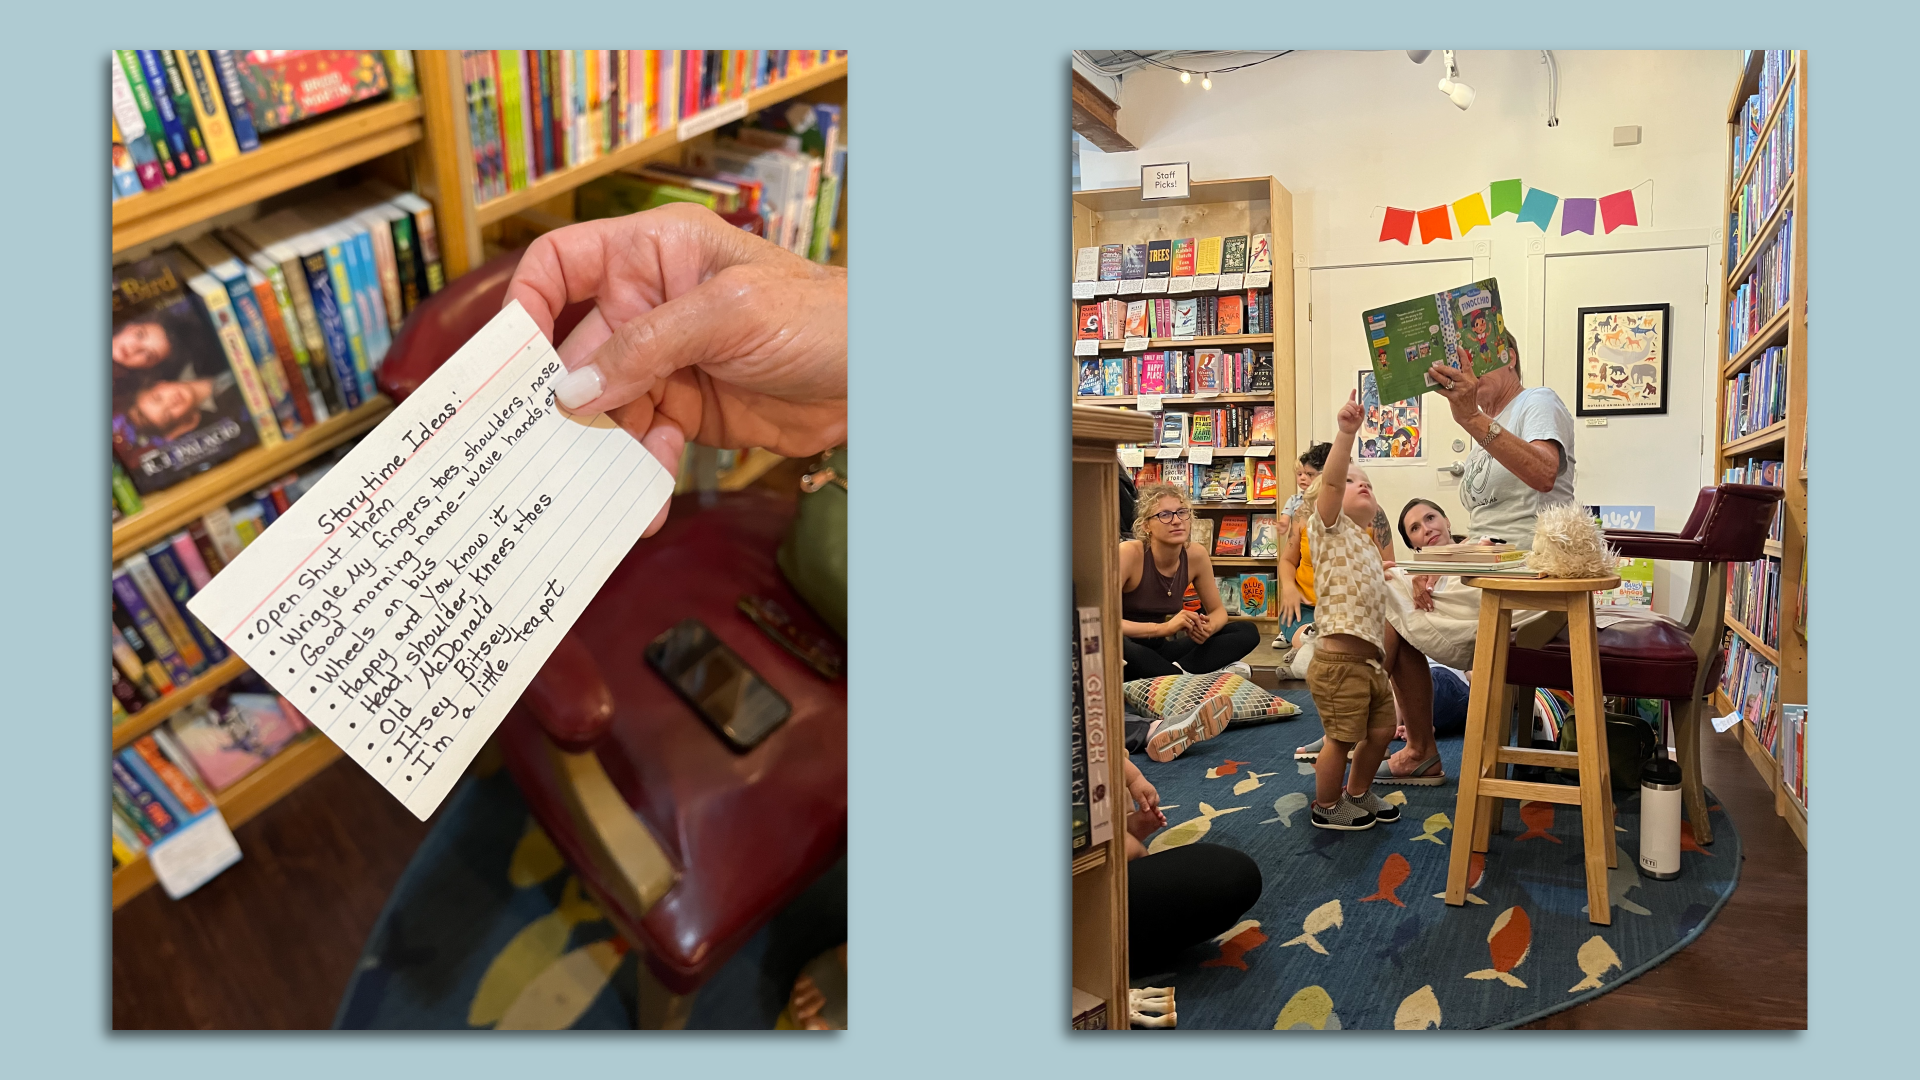 On the left, a photo of an index card with children's songs and rhymes written down in black pen. On the right, a woman reads "Pinocchio" in a bookstore while a child reaches up to touch a page.